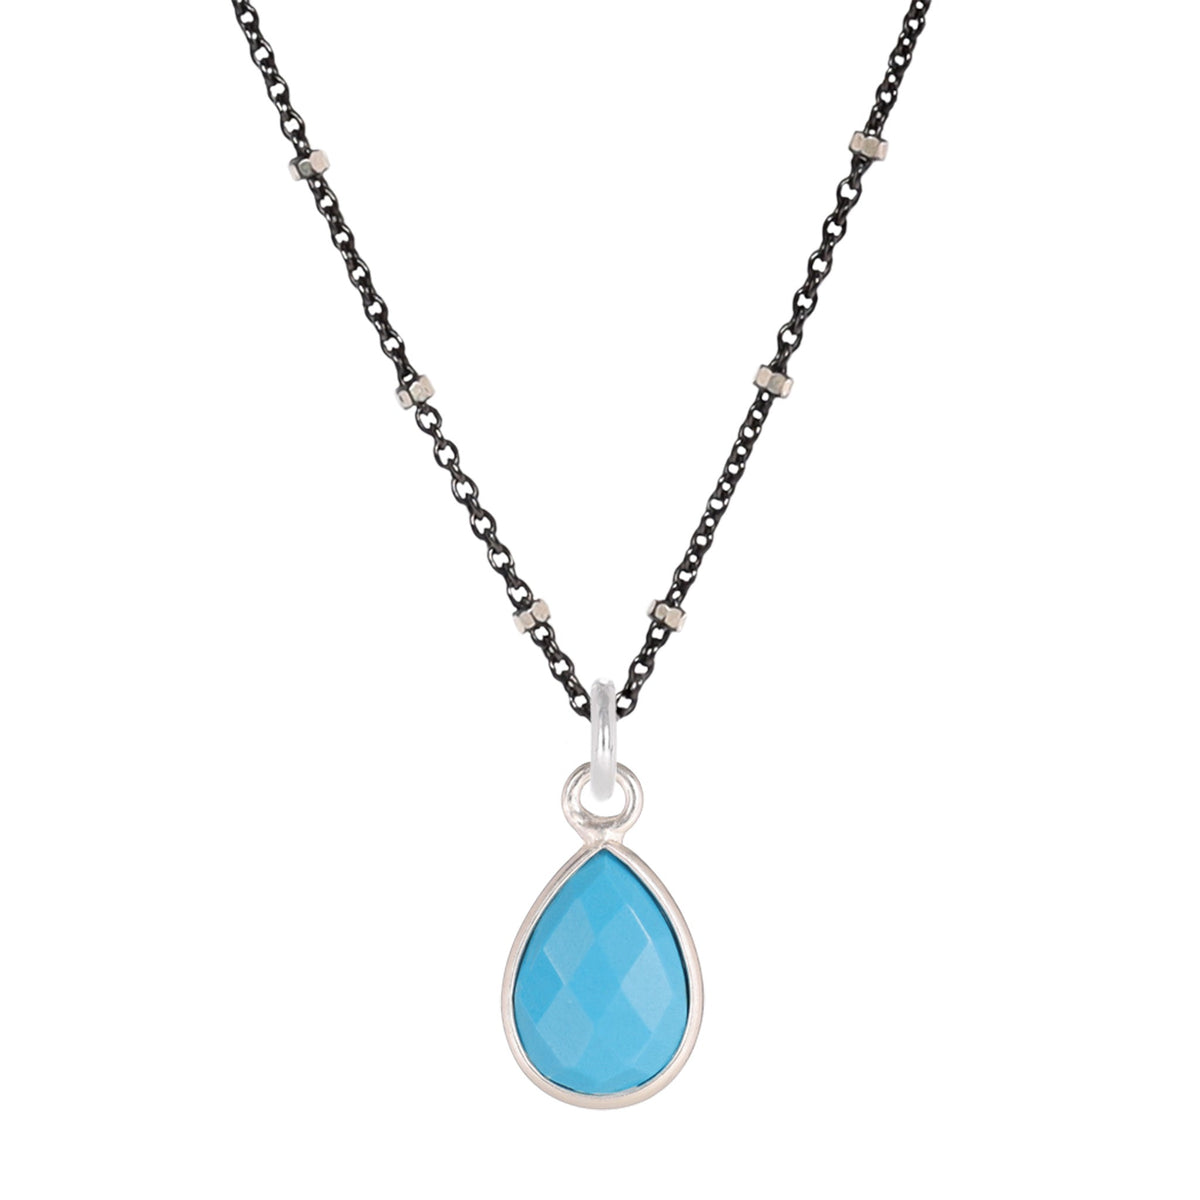 Oxidized Sterling Silver Chain with Teardrop Turquoise in Sterling Silver Bezel